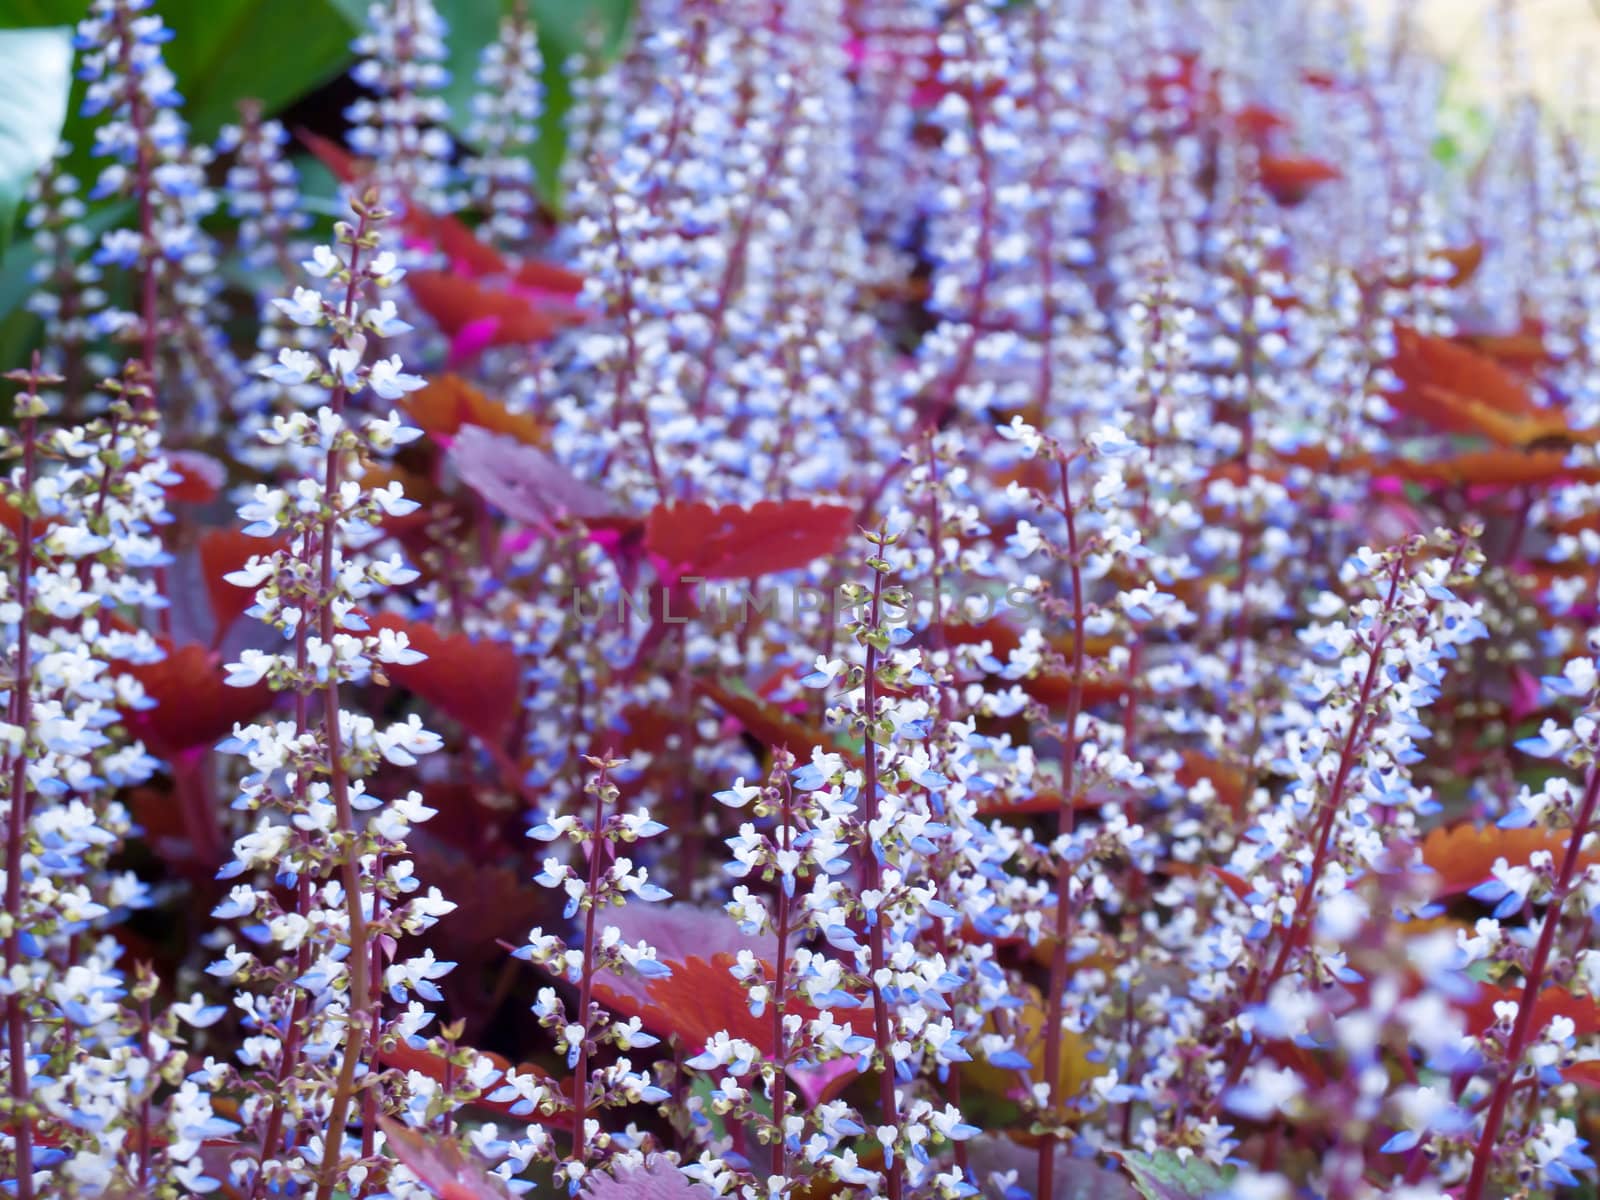 Colorful field of coleus flowers with shallow DoF(depth of field), Solenostemon scutellarioides common name Coleus, Flame Nettle, Painted Nettle